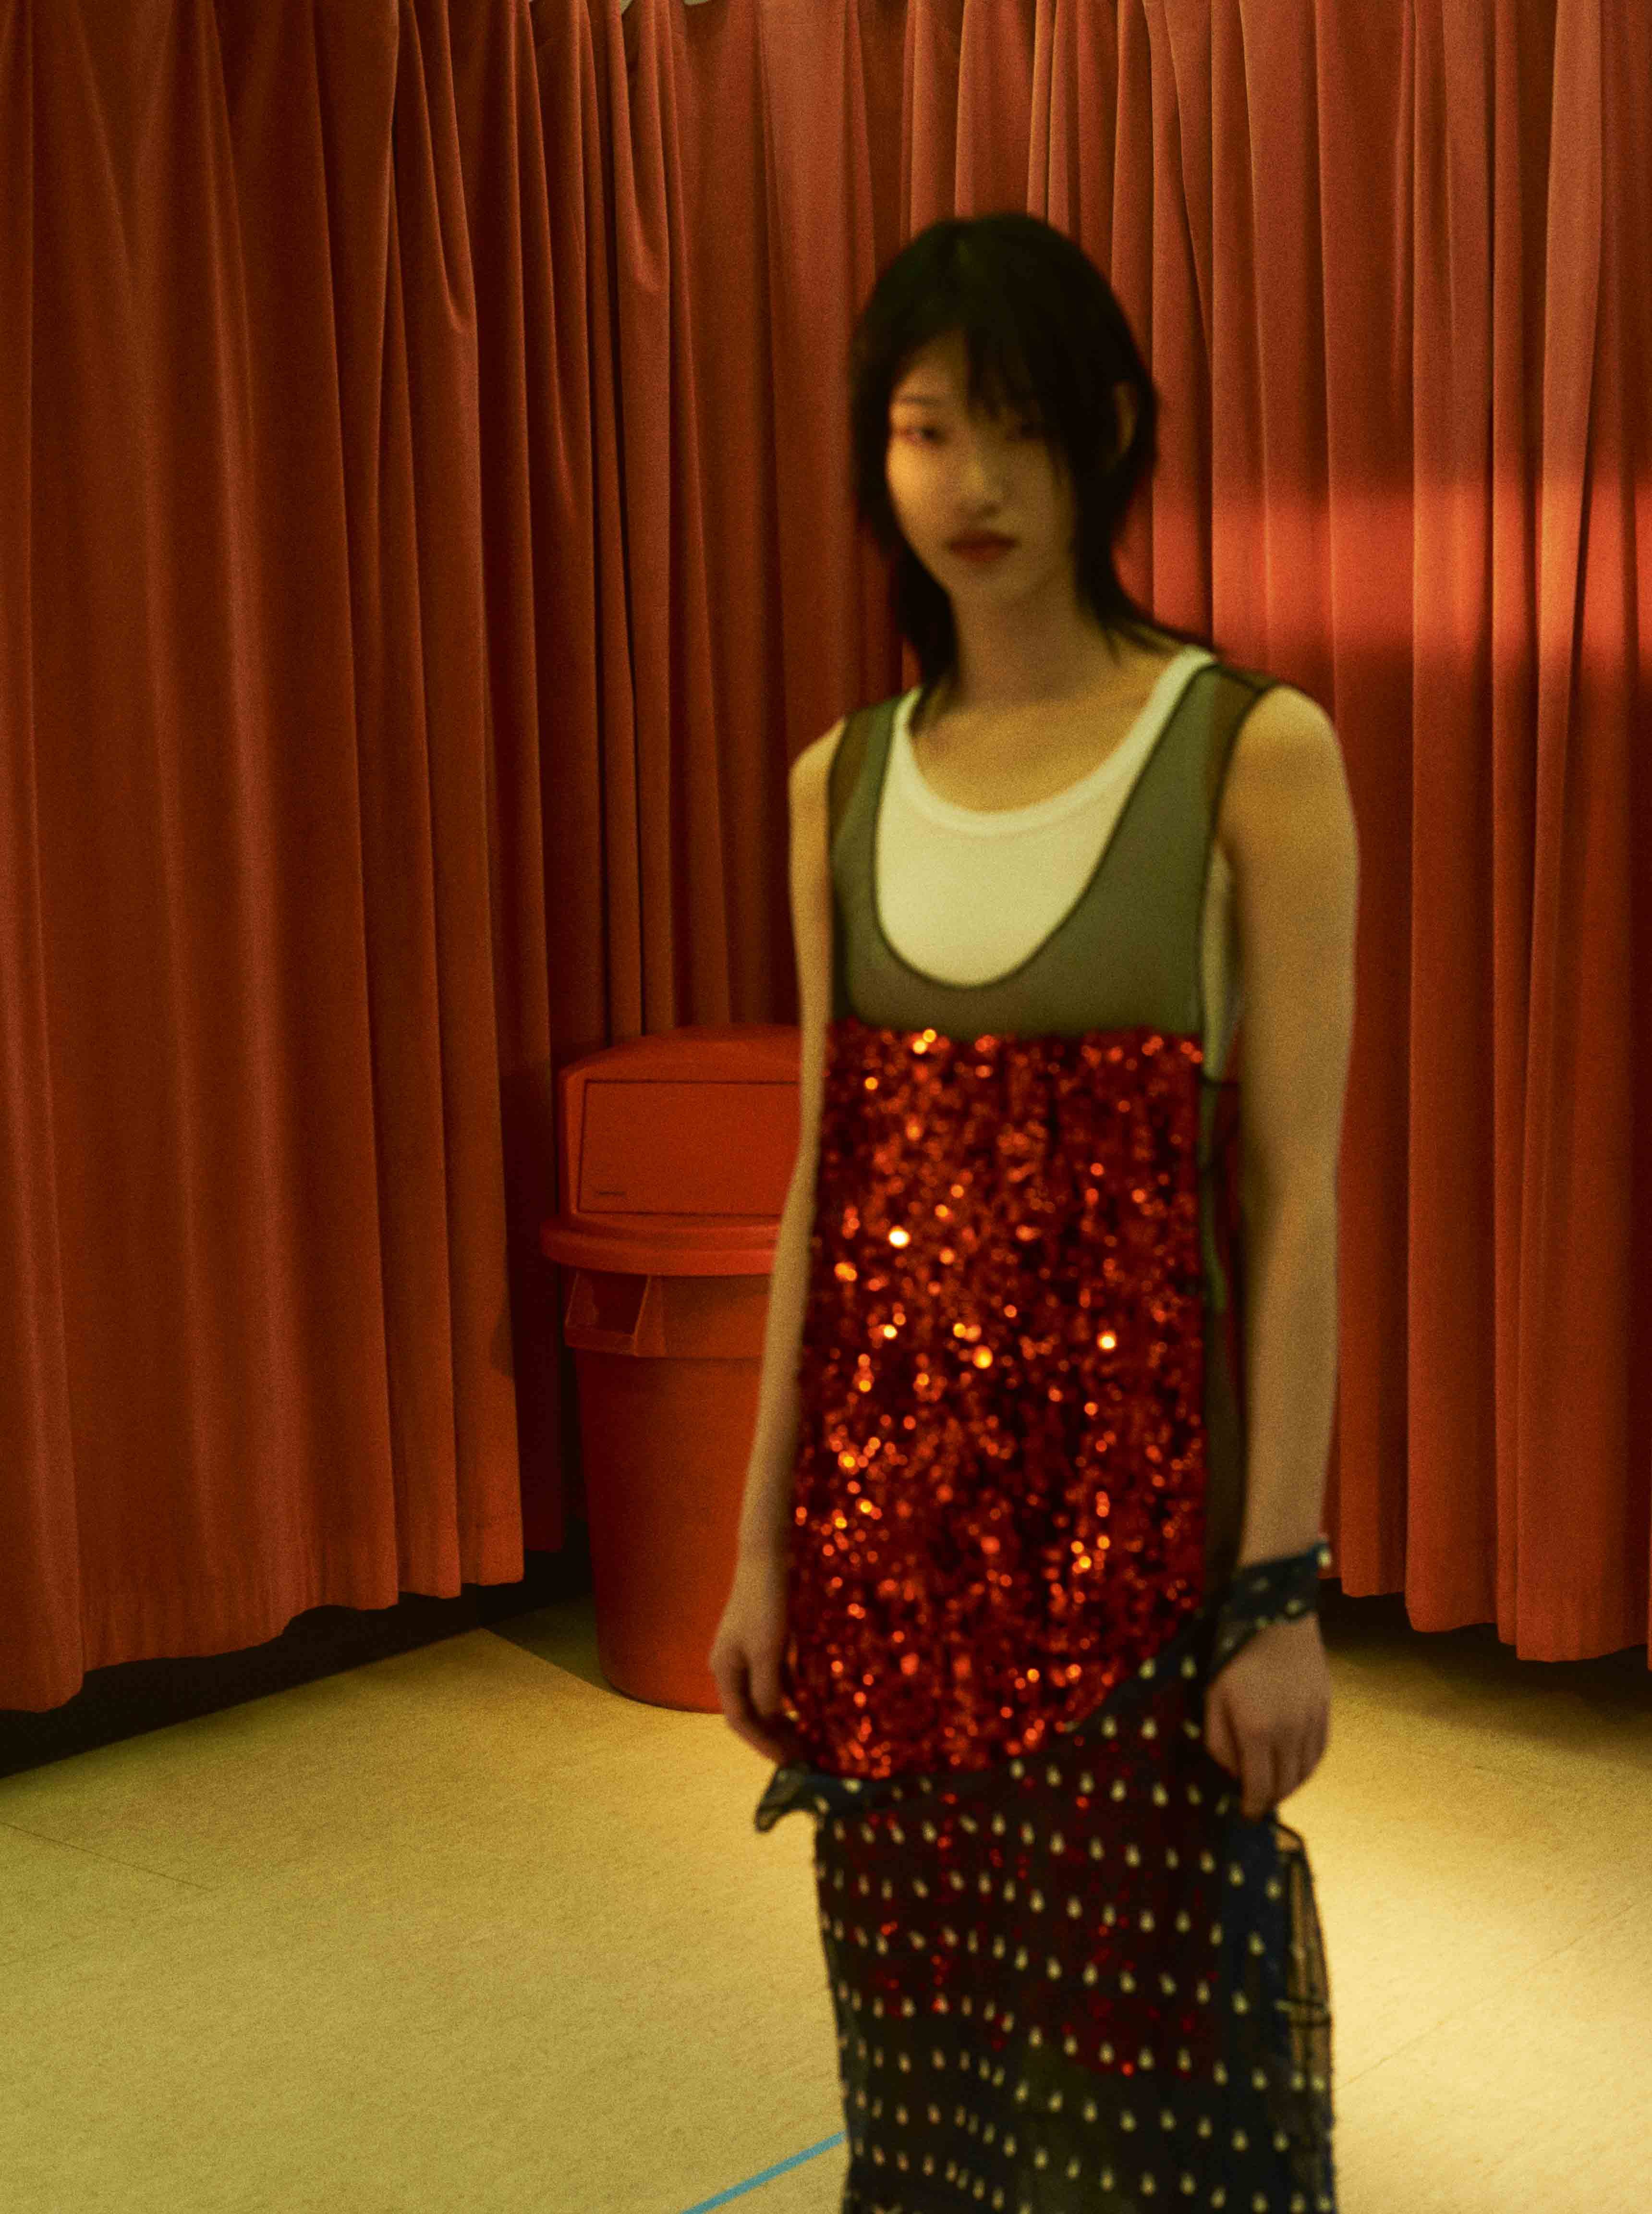 Sequins-embroidered dress, pearls-embroidered organza dress and cotton tank top, MIU MIU.